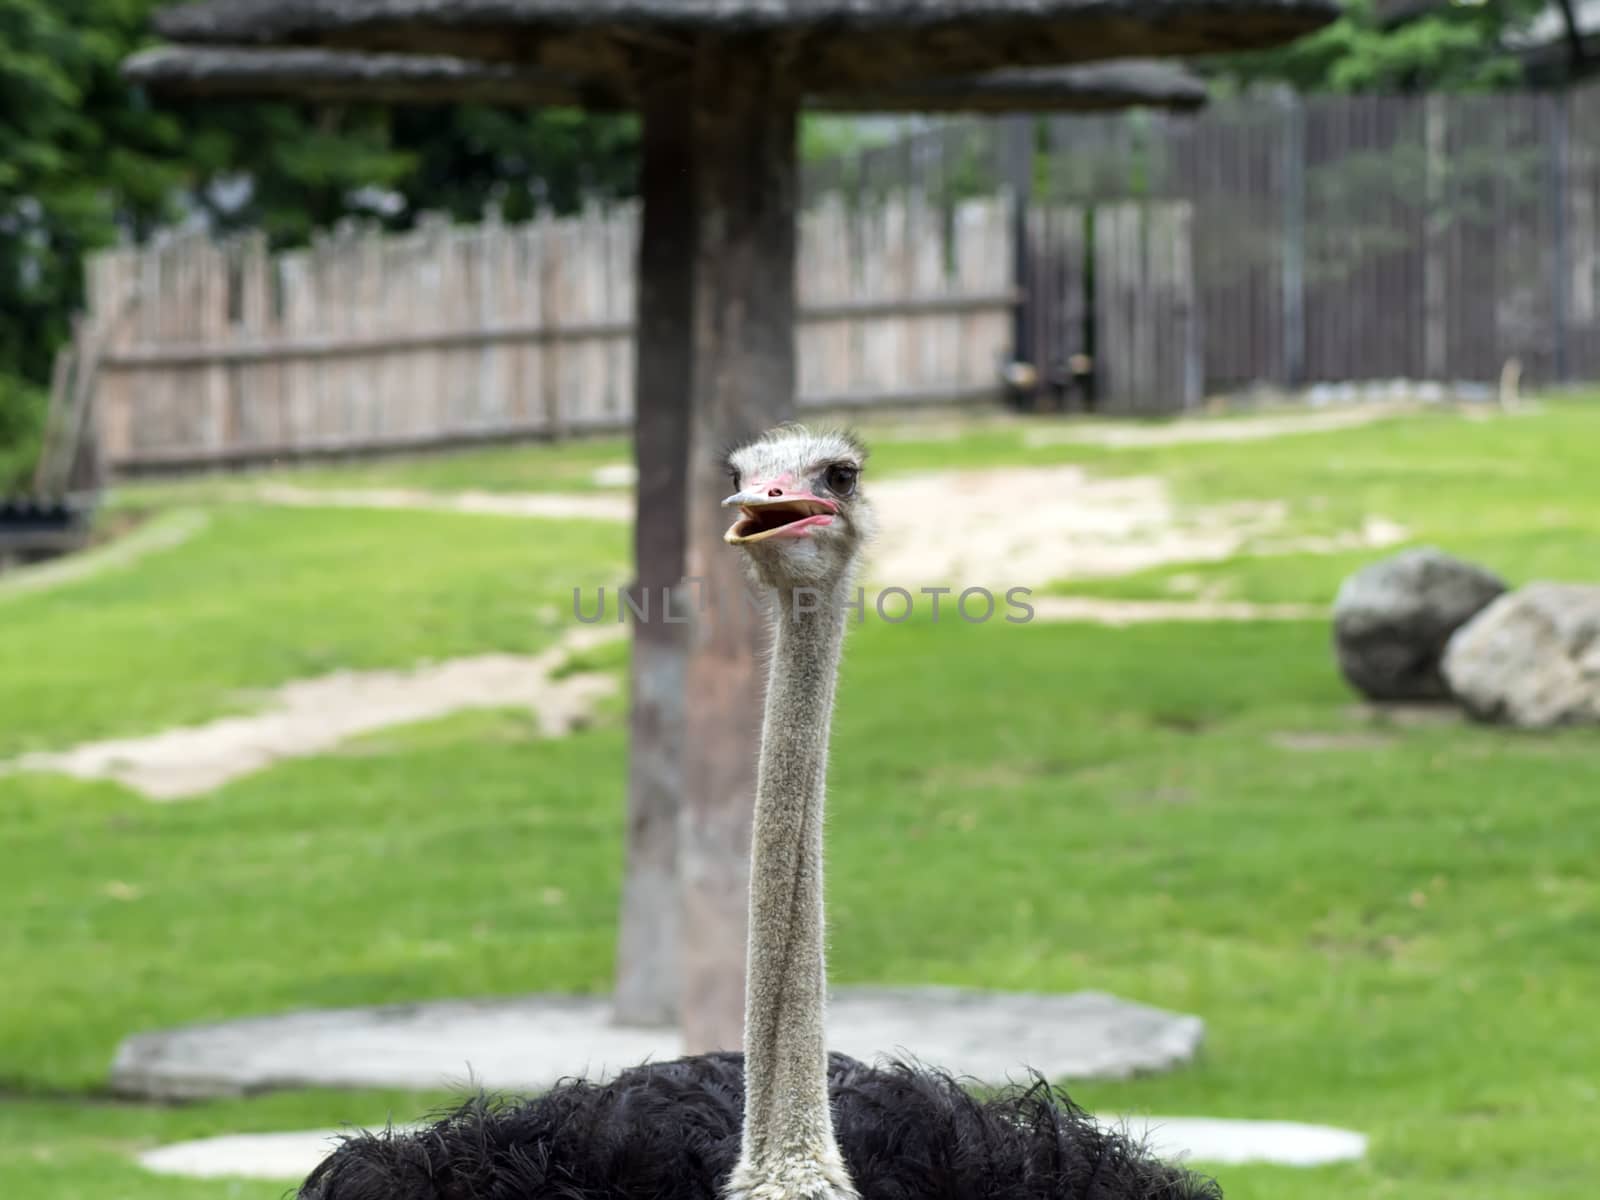 Common Ostrich. Struthio Camelus is either one or two species of large flightless birds native to Africa.